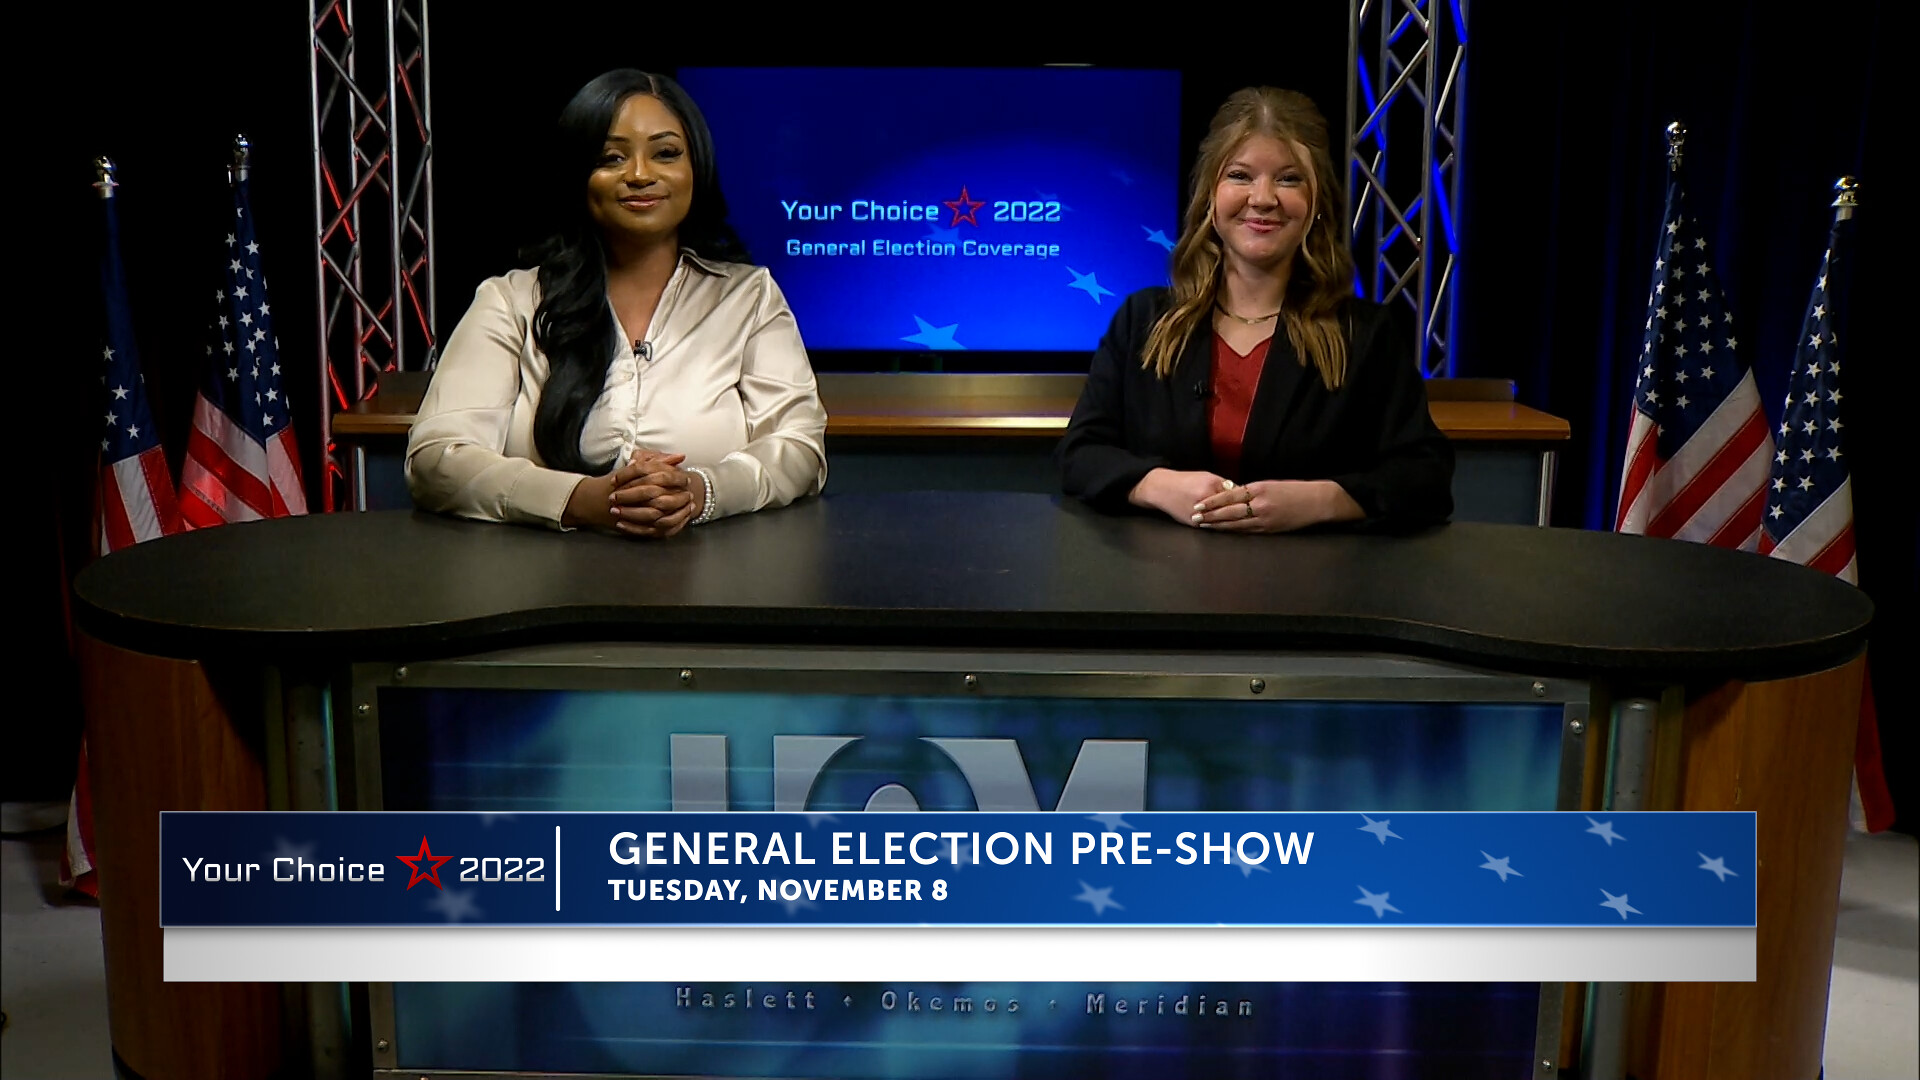 Your Choice 2022 General Election Pre-Show